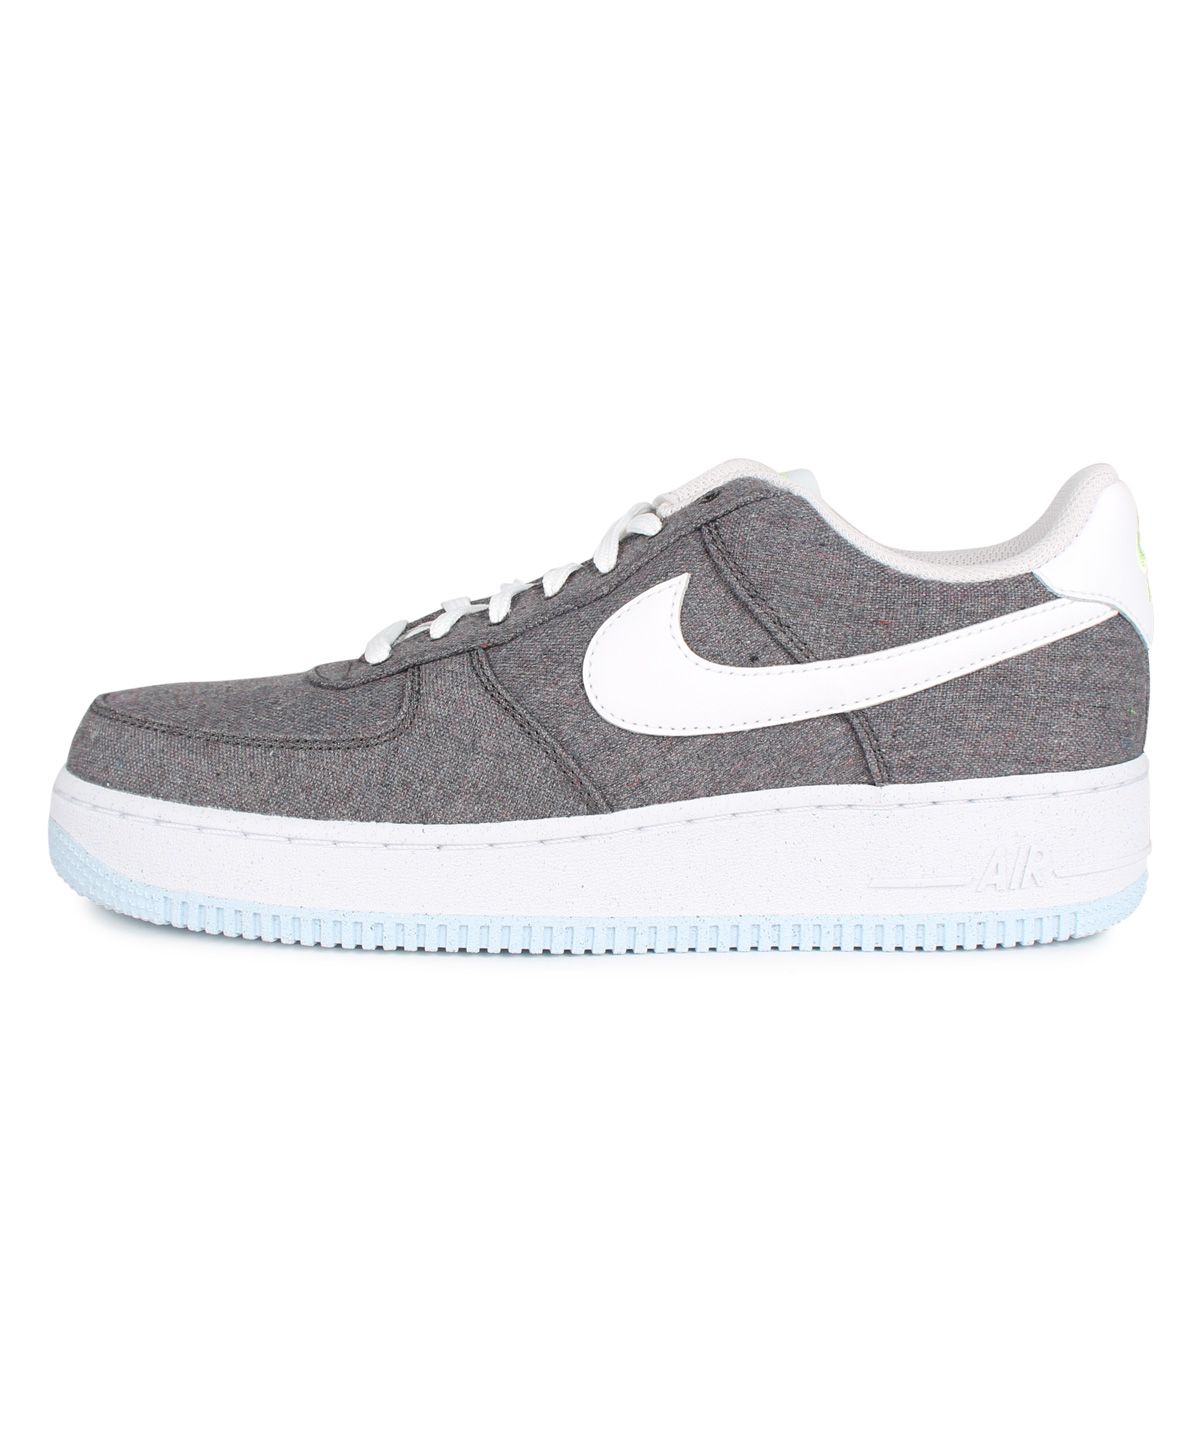 NIKE AIR FORCE 1 07 RECYCLED CANVAS PACK ナイキ エアフォース1 スニーカー メンズ グレー  CN0866－002